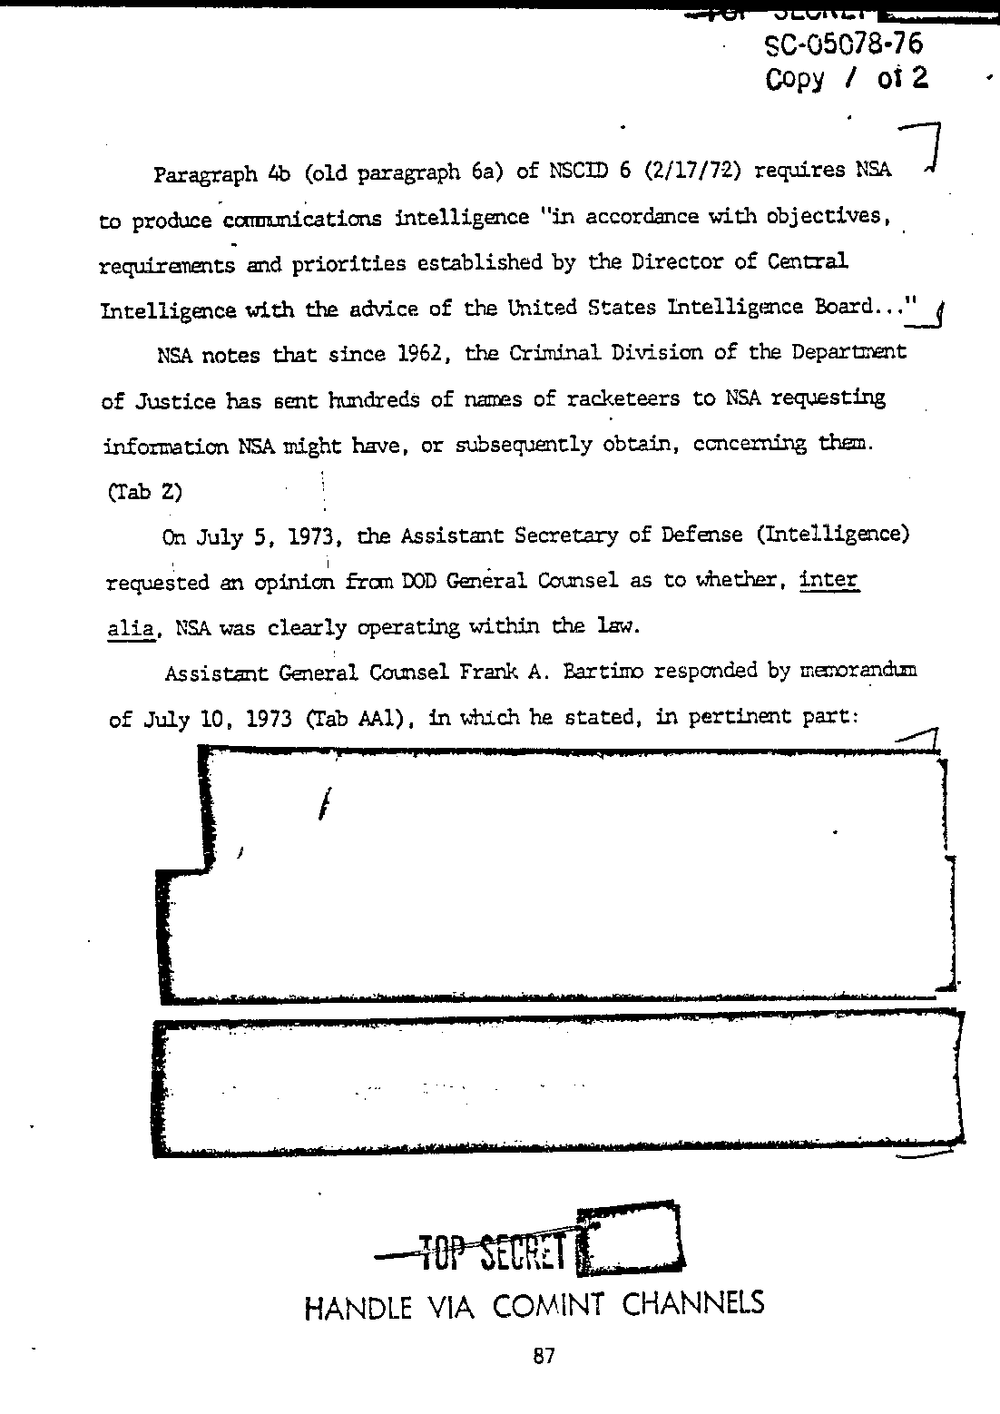 Page 95 from Report on Inquiry Into CIA Related Electronic Surveillance Activities